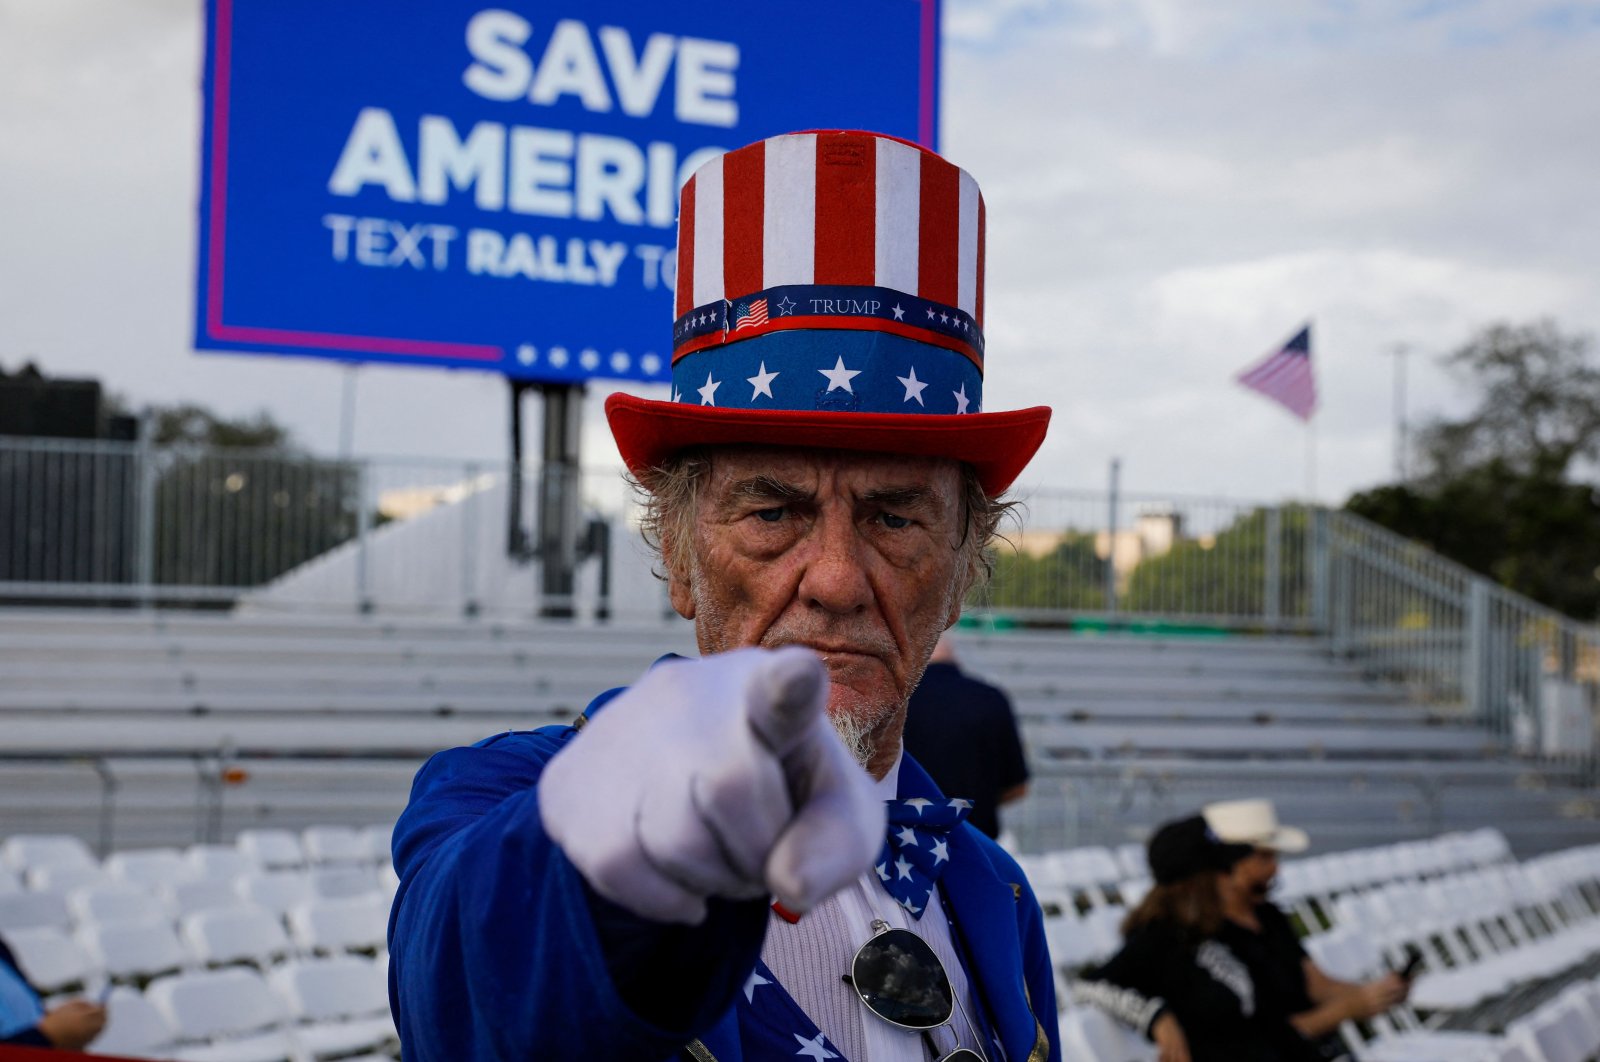 A costumed attendee arrives for a &quot;Save America&quot; rally ahead of the U.S. midterm elections, Miami, Florida, Nov. 6, 2022. (AFP Photo)